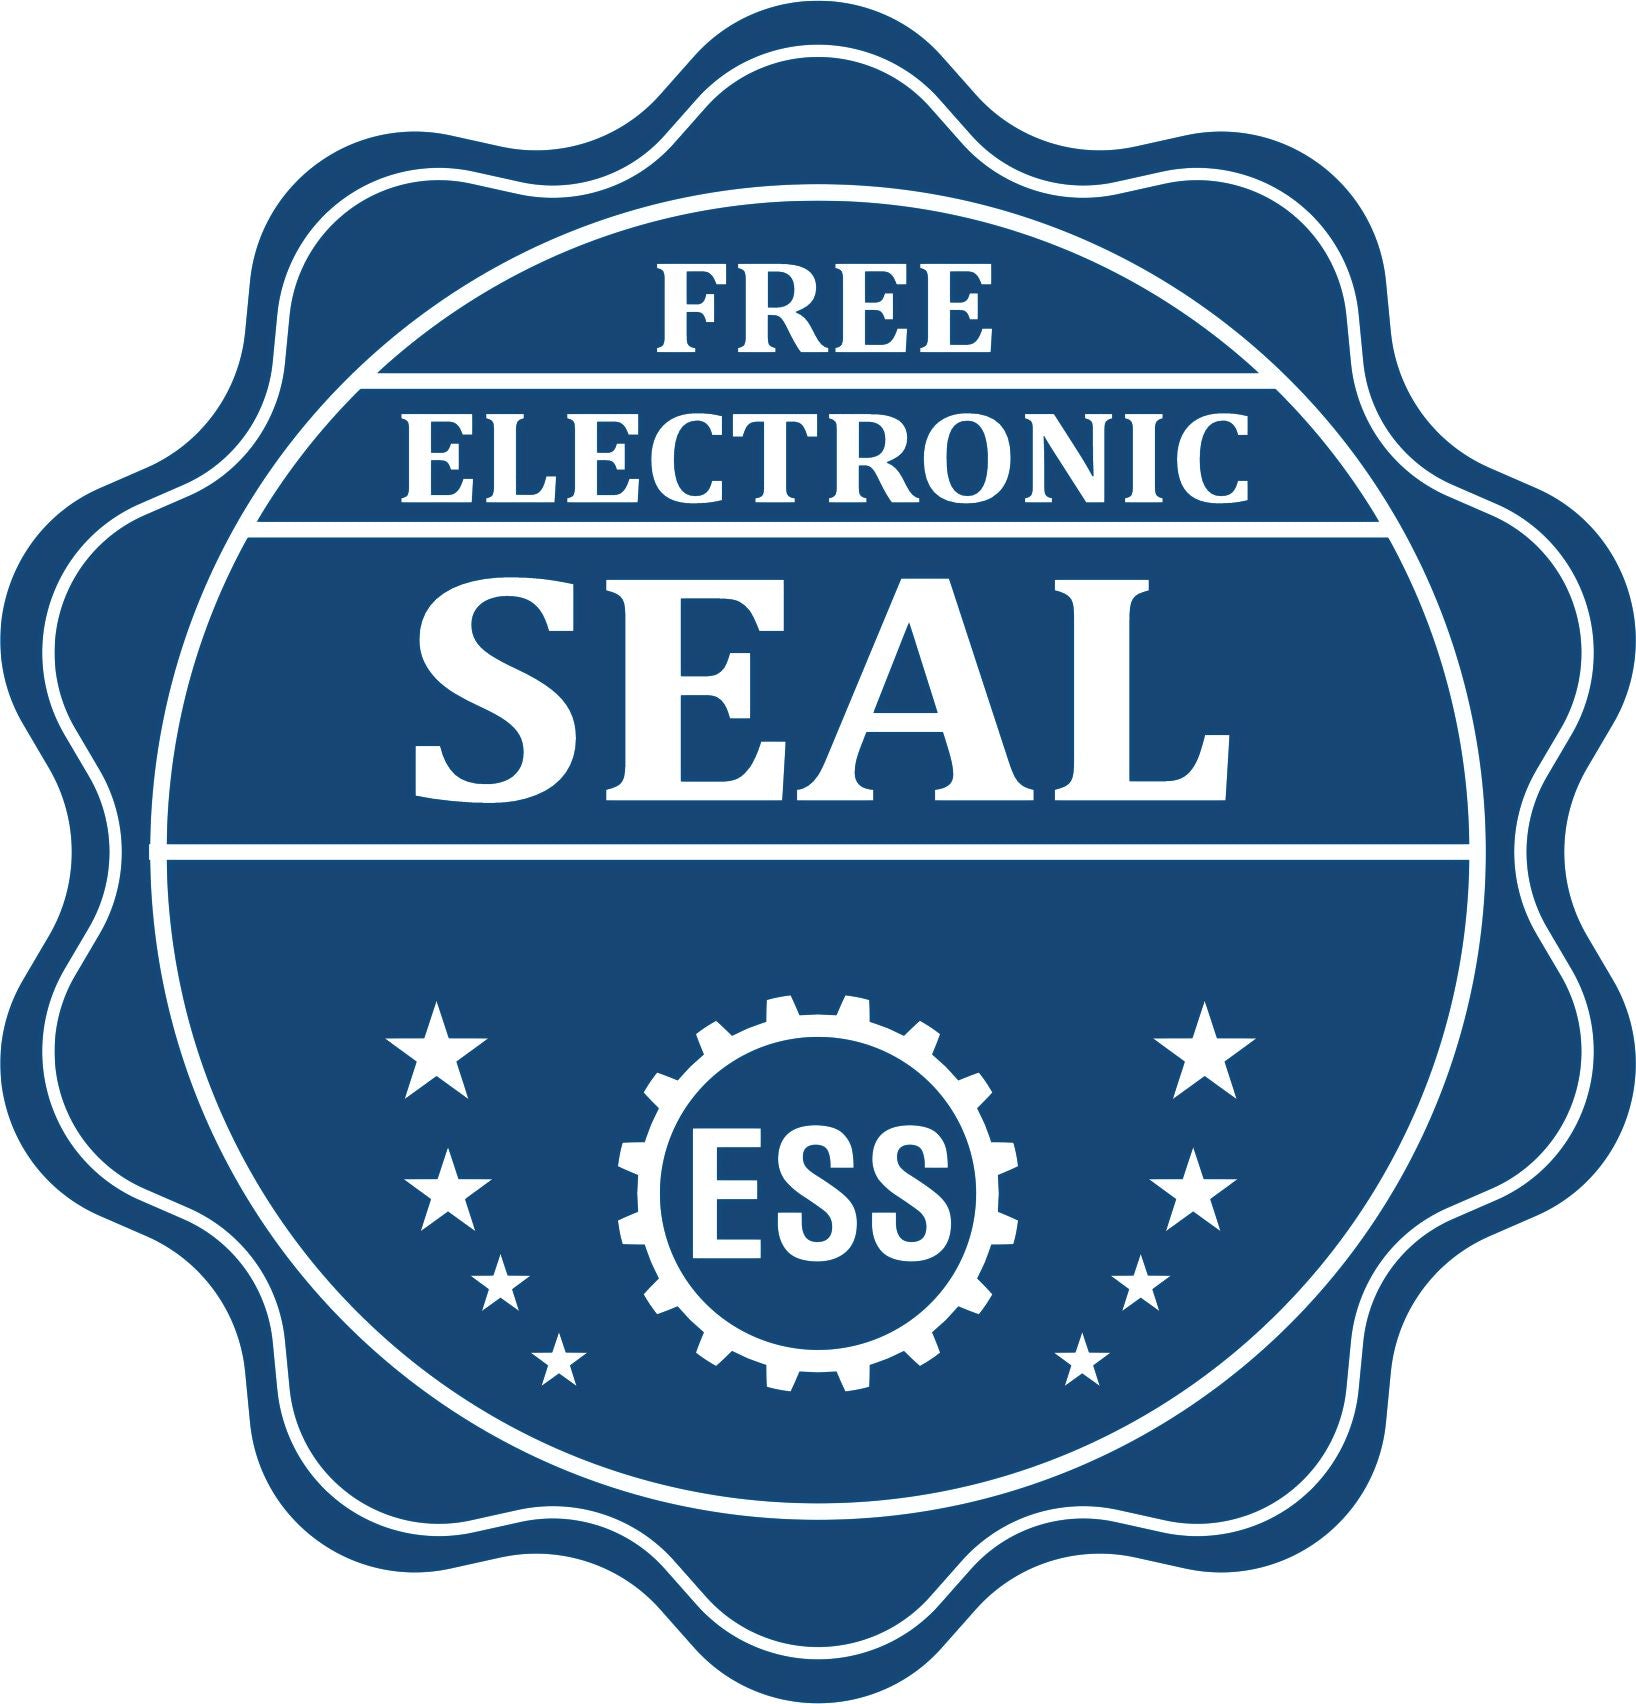 A badge showing a free electronic seal for the Indiana Engineer Desk Seal with stars and the ESS gear on the emblem.